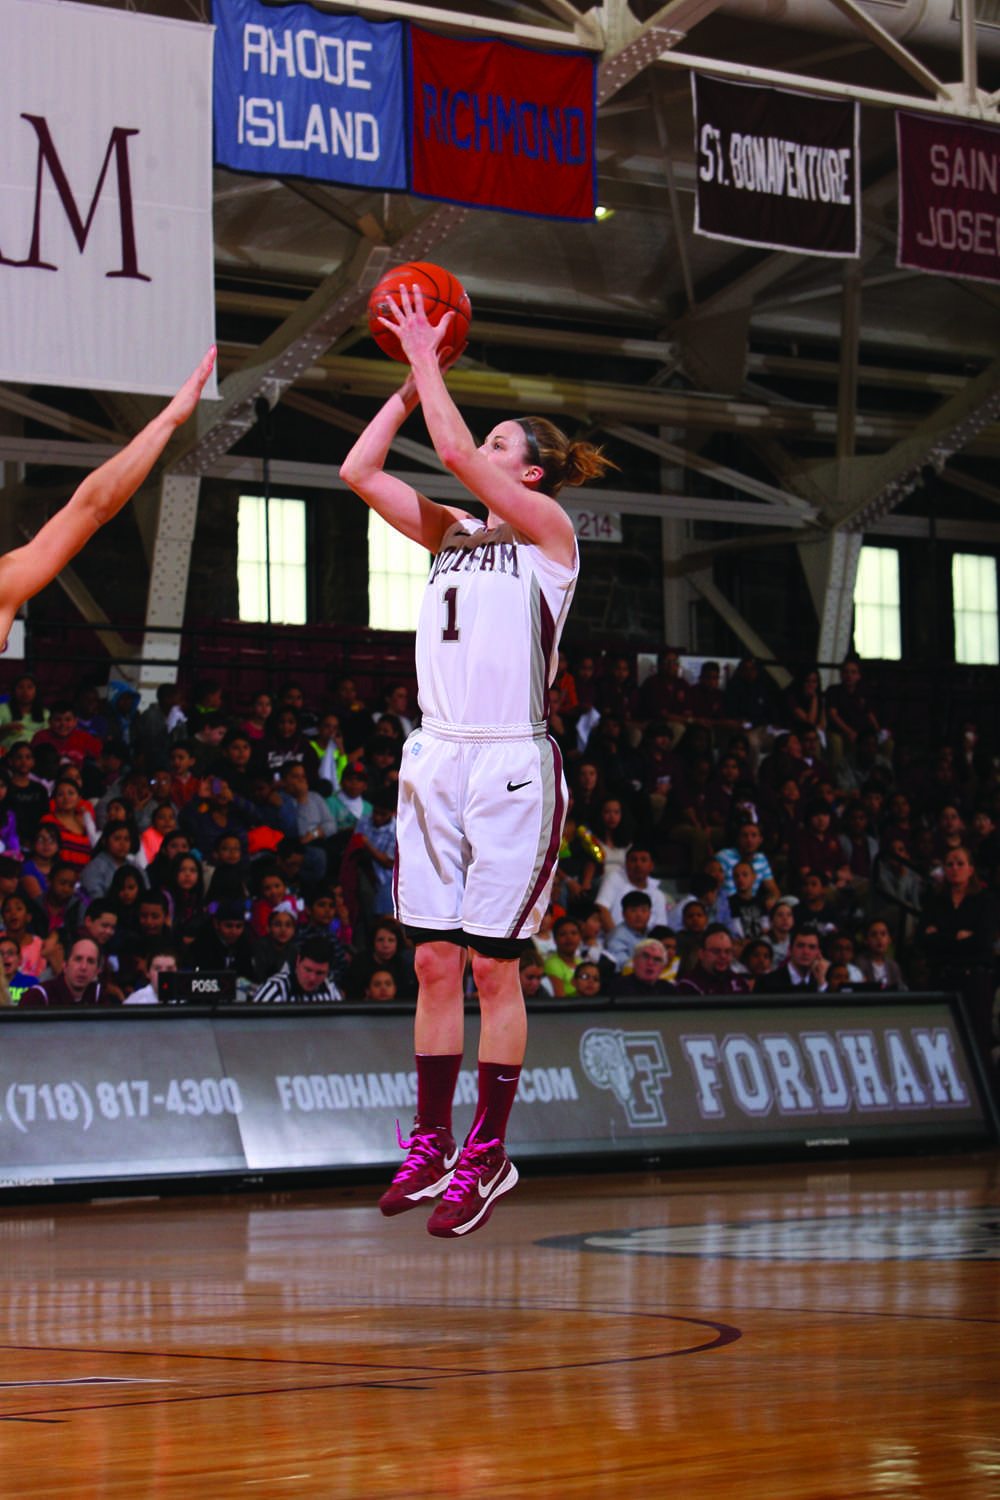 Erin Rooney, FCRH ’13, was key in the team’s second- round victory. (Courtesy of Fordham Sports)